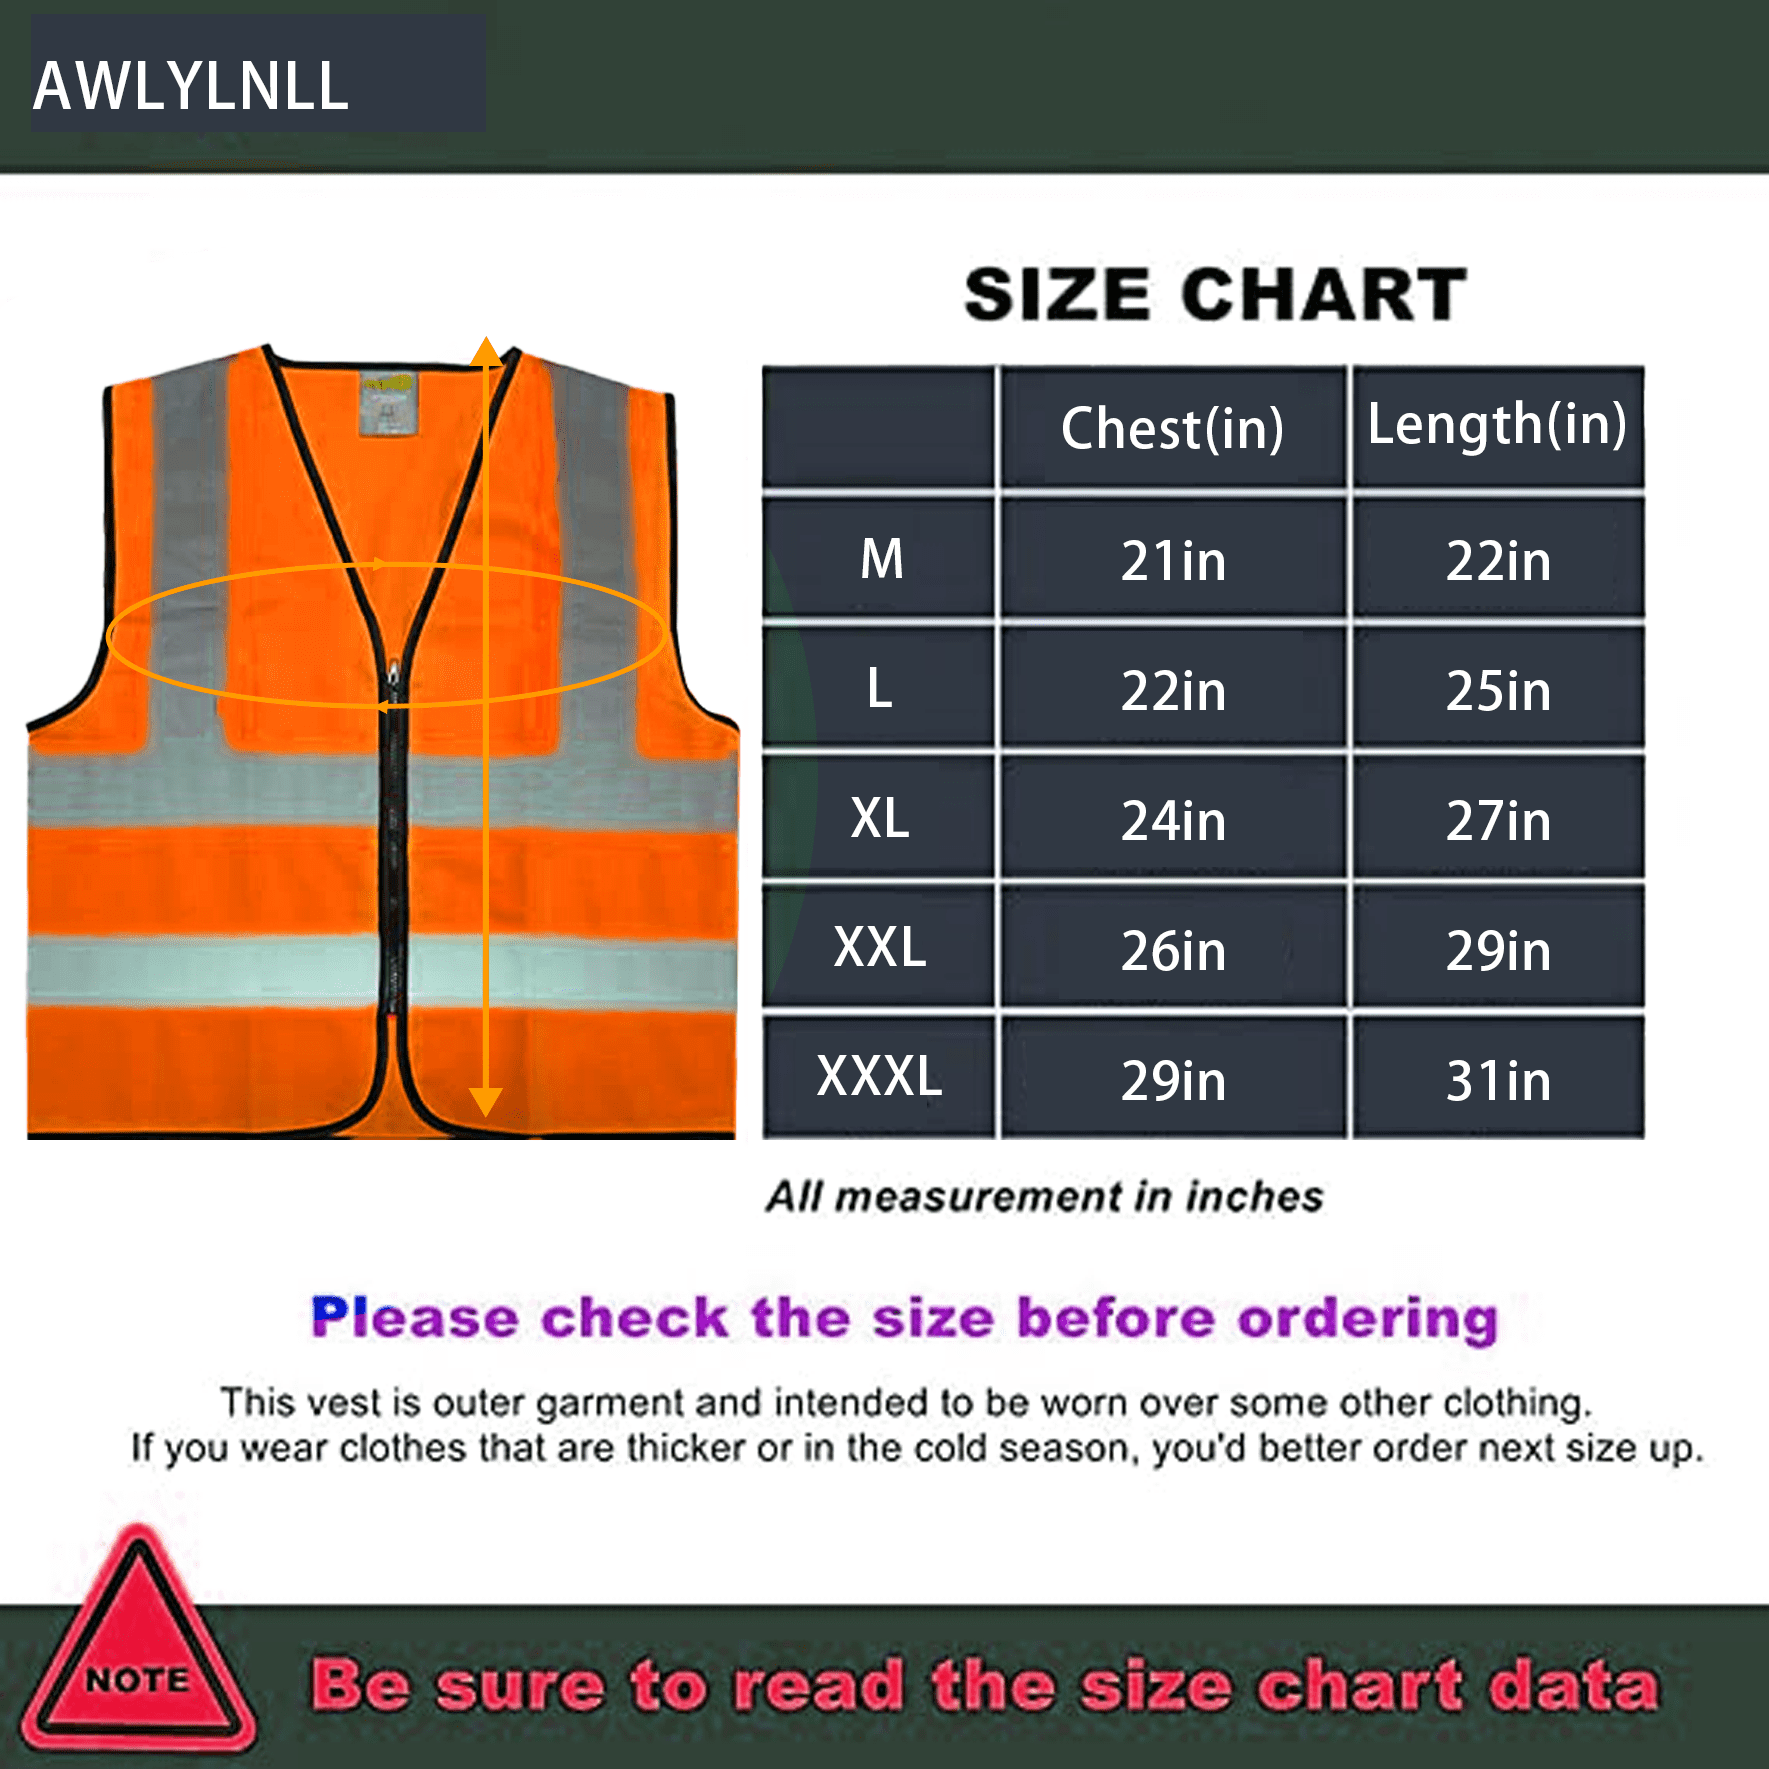 AWLYLNLL High Visibility Safety Vest for Men Women, Construction Vest with  Reflective Strips and Zipper Front, Neon Orange, Medium 